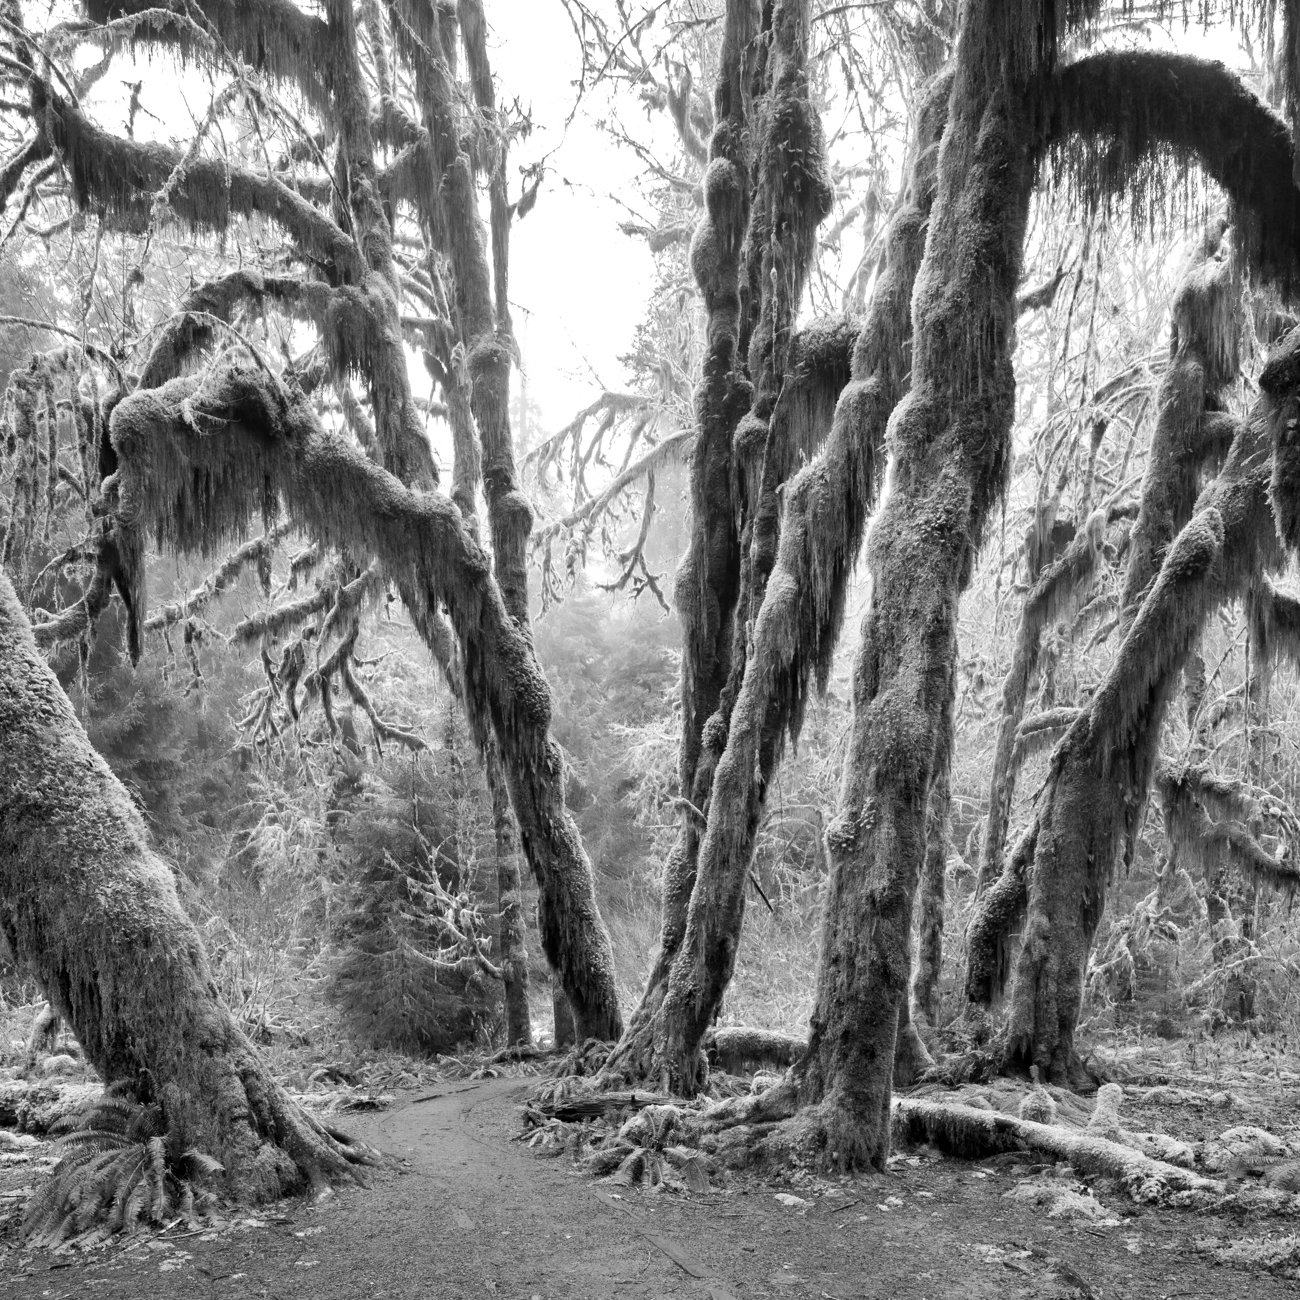 A black and white square image of the Hoh Rain Forest on the Olympic Peninsula in Washington State.